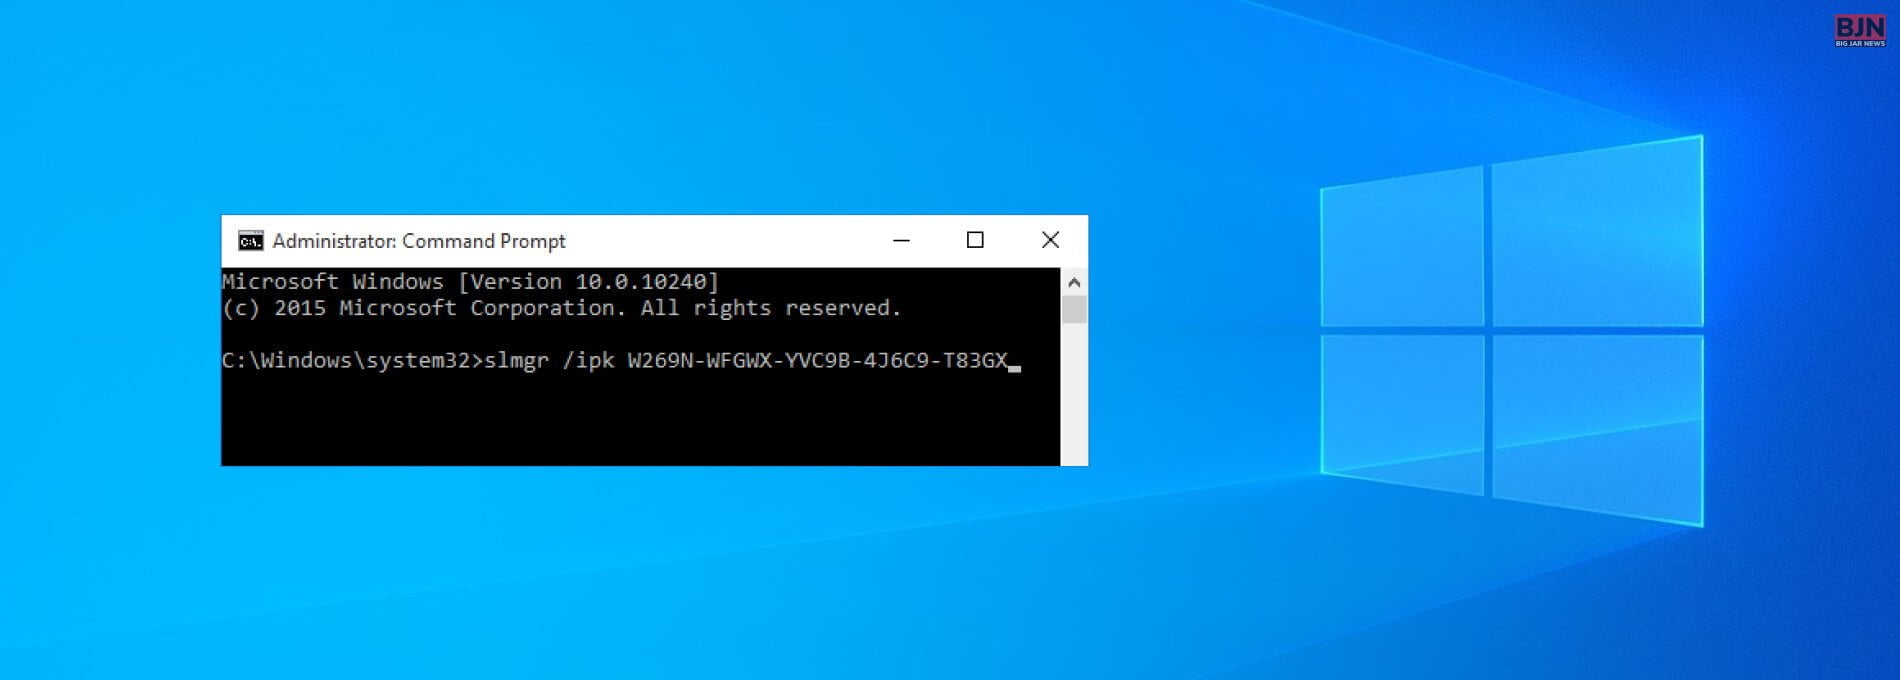 How To Activate Windows 10 Using Cmd Step By Step Guide 5508